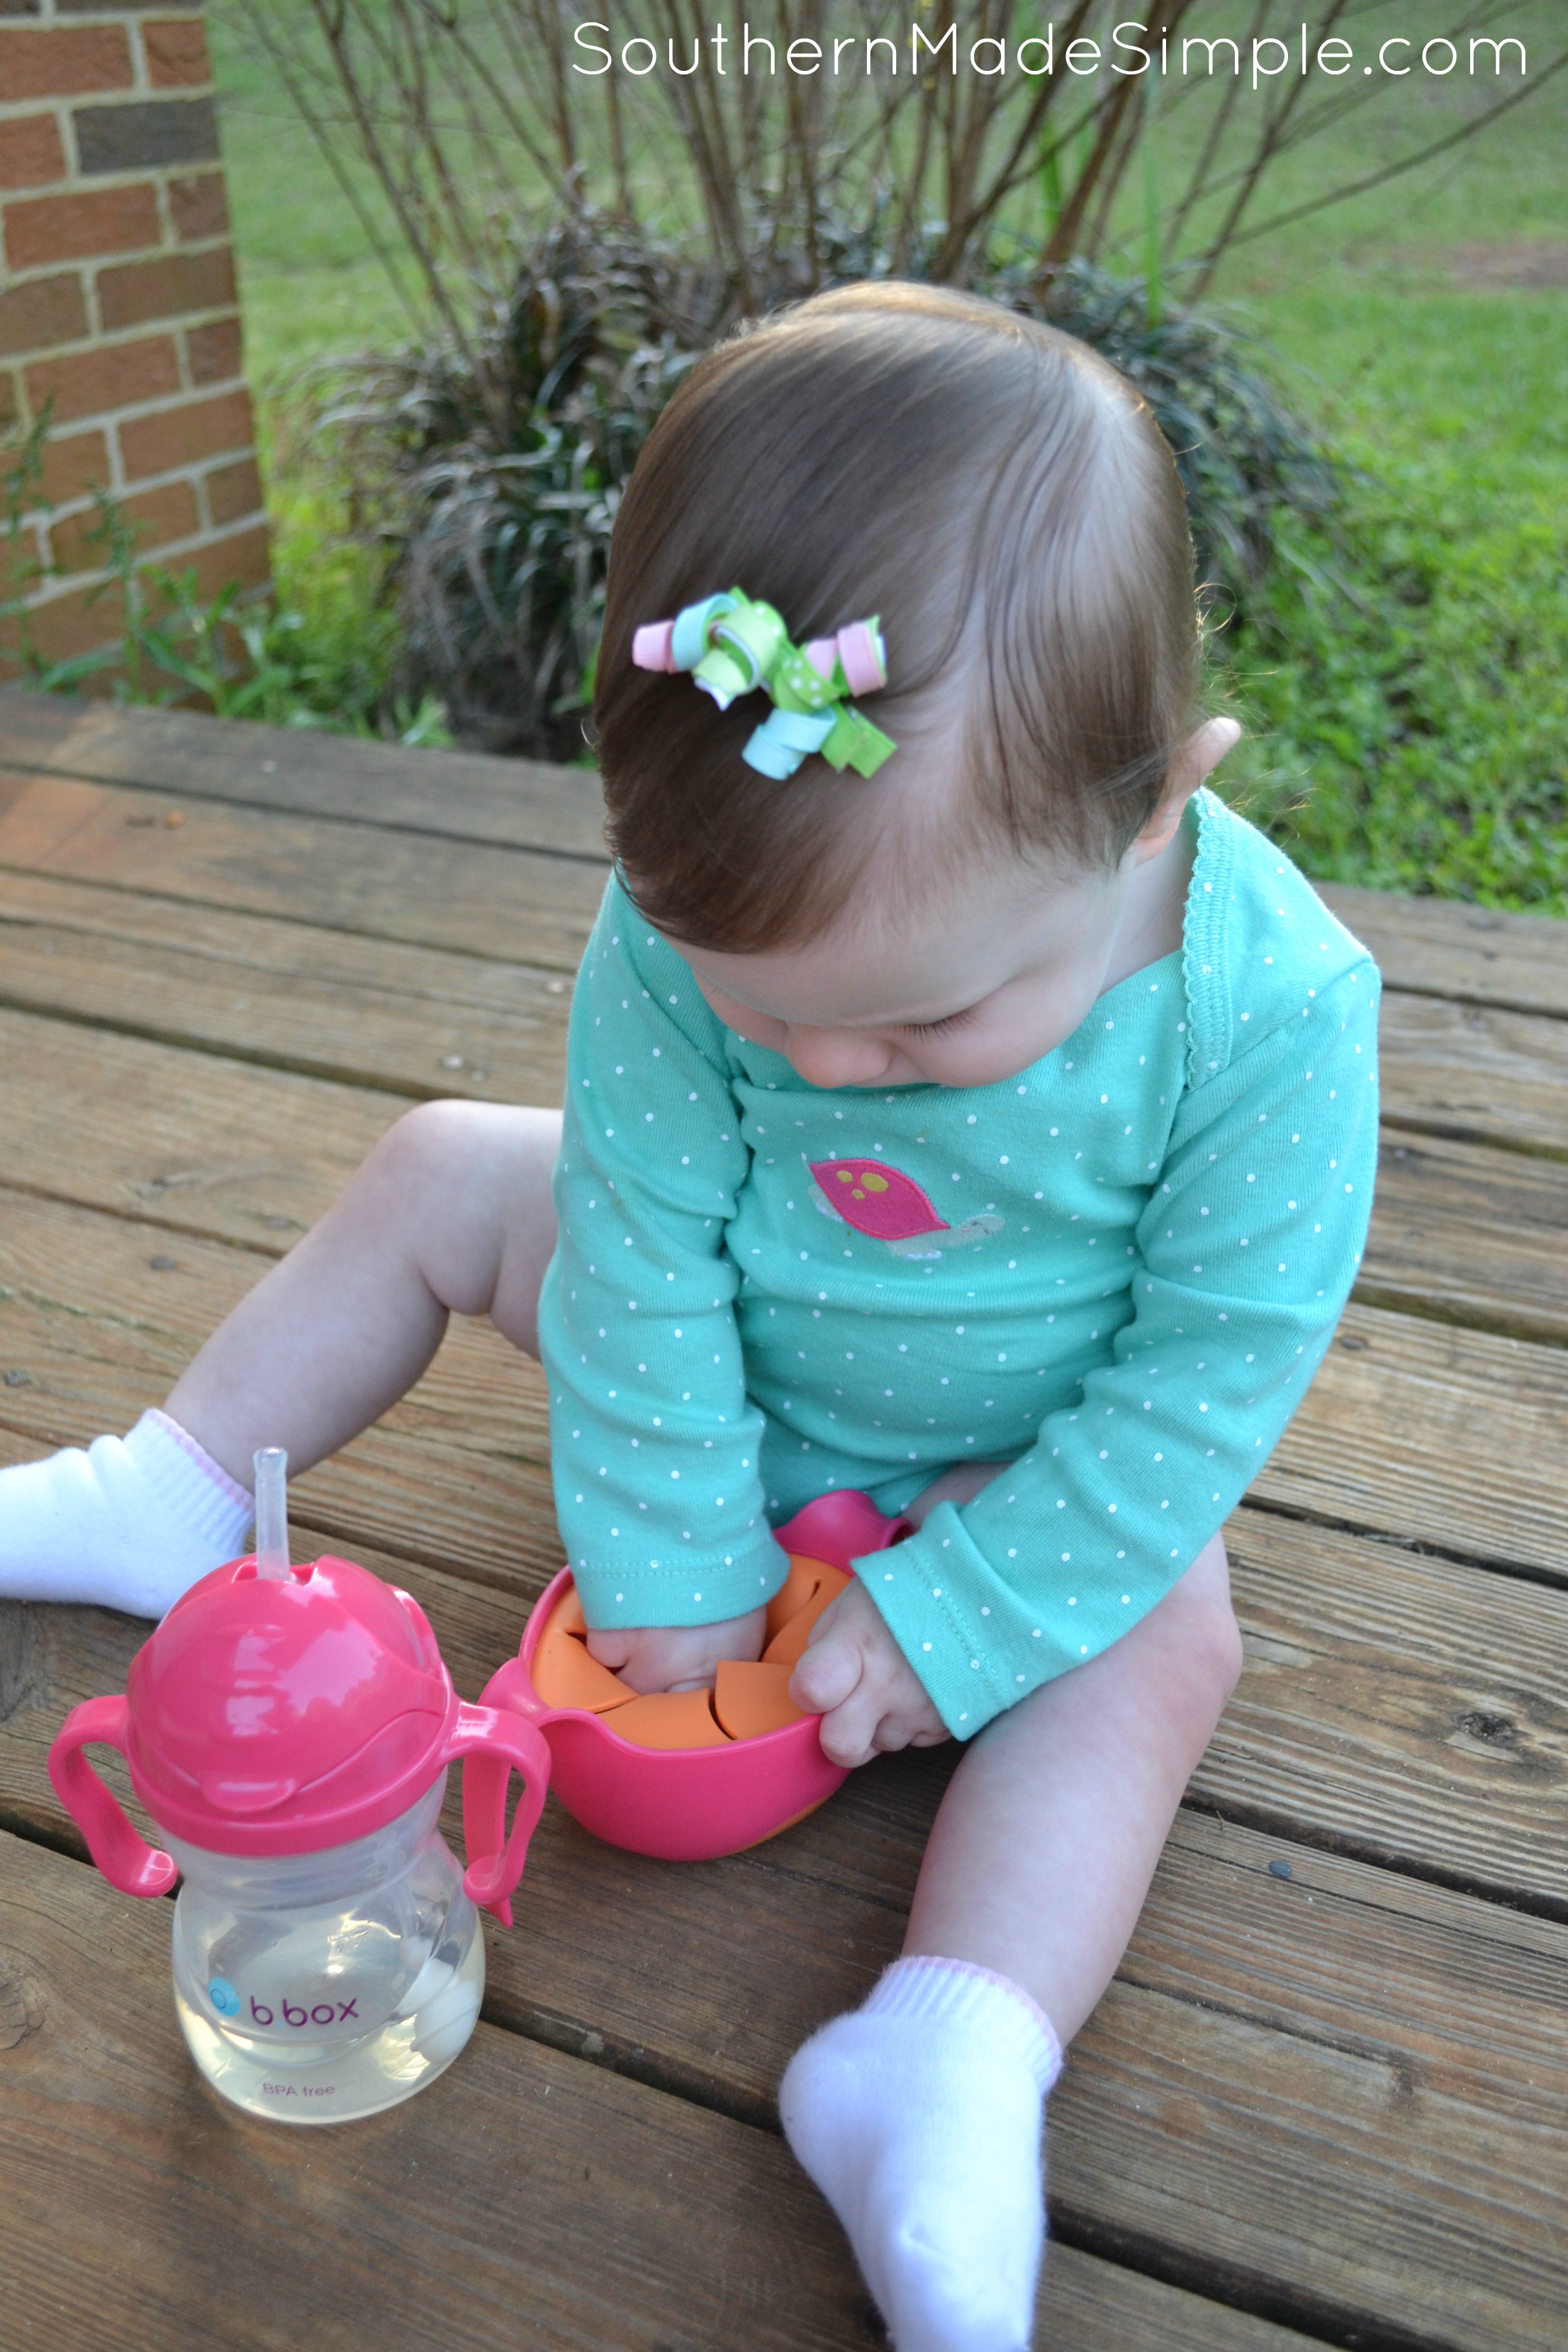 b.box puts the fun in functional during meal time! Review + giveaway! Ends 4/14